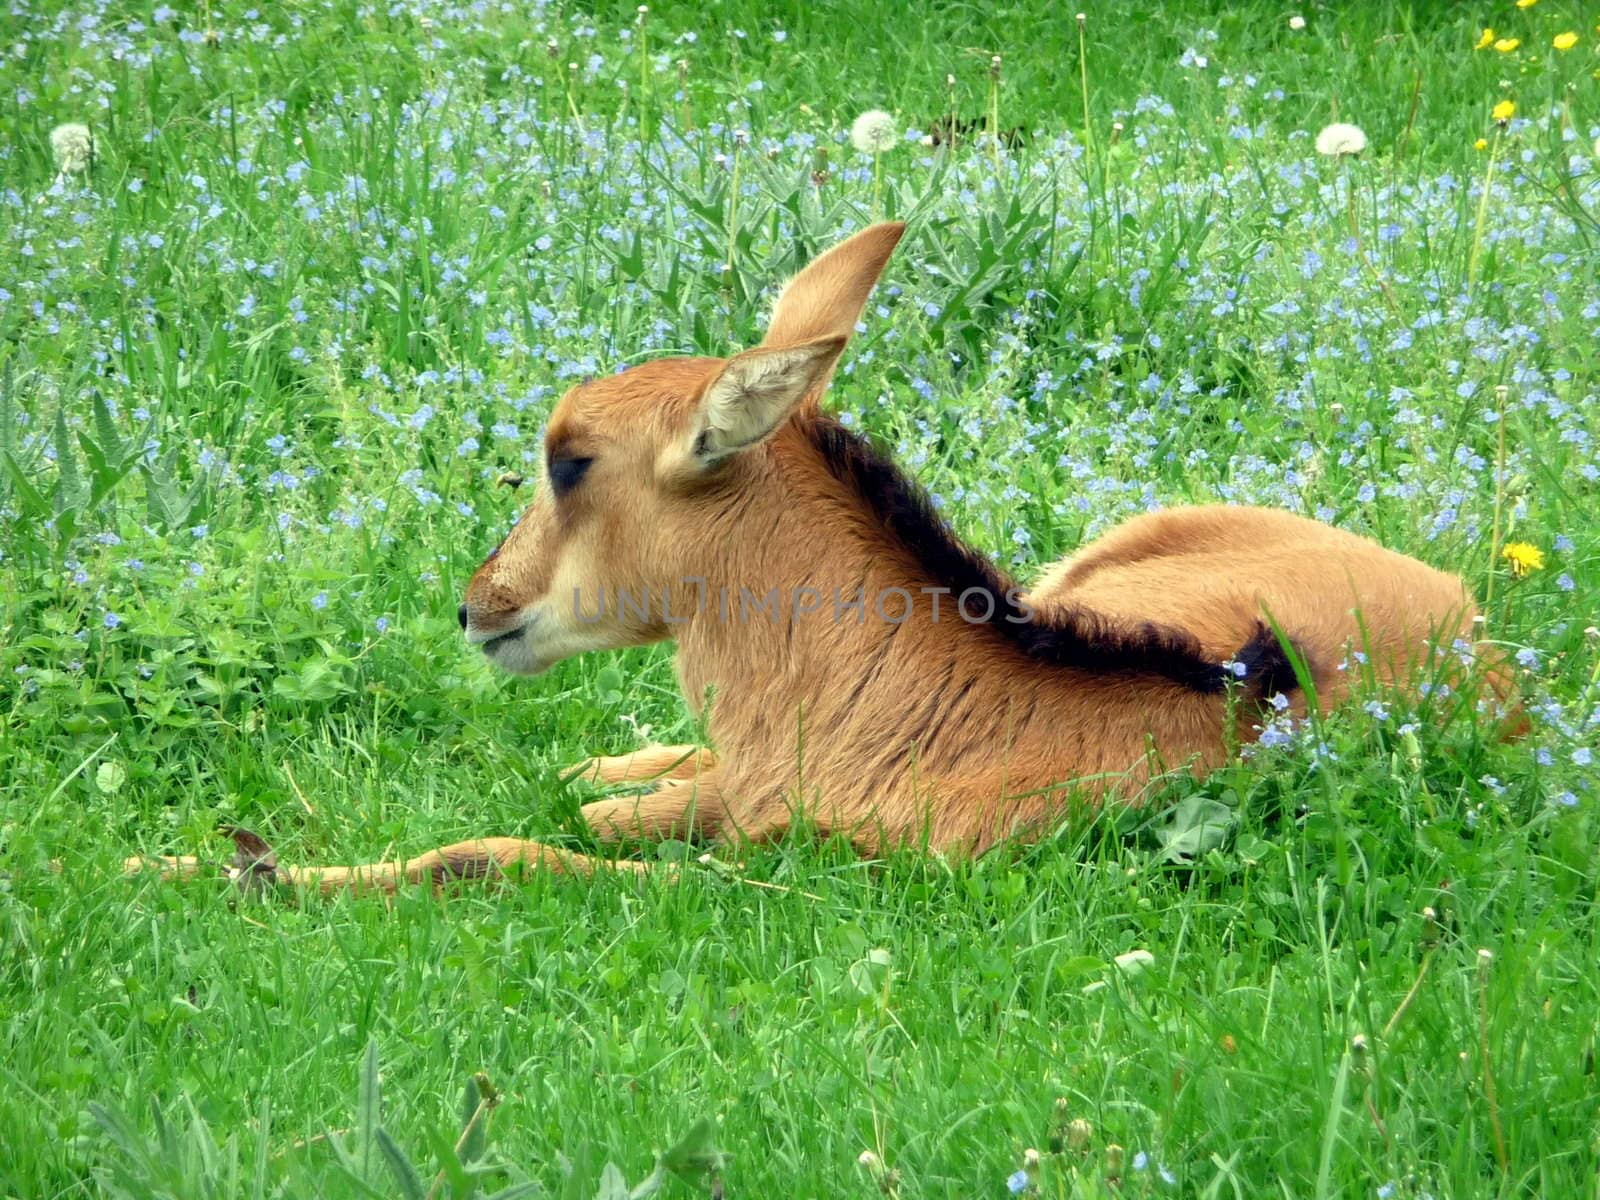 Antelope kid on lawn by tomatto